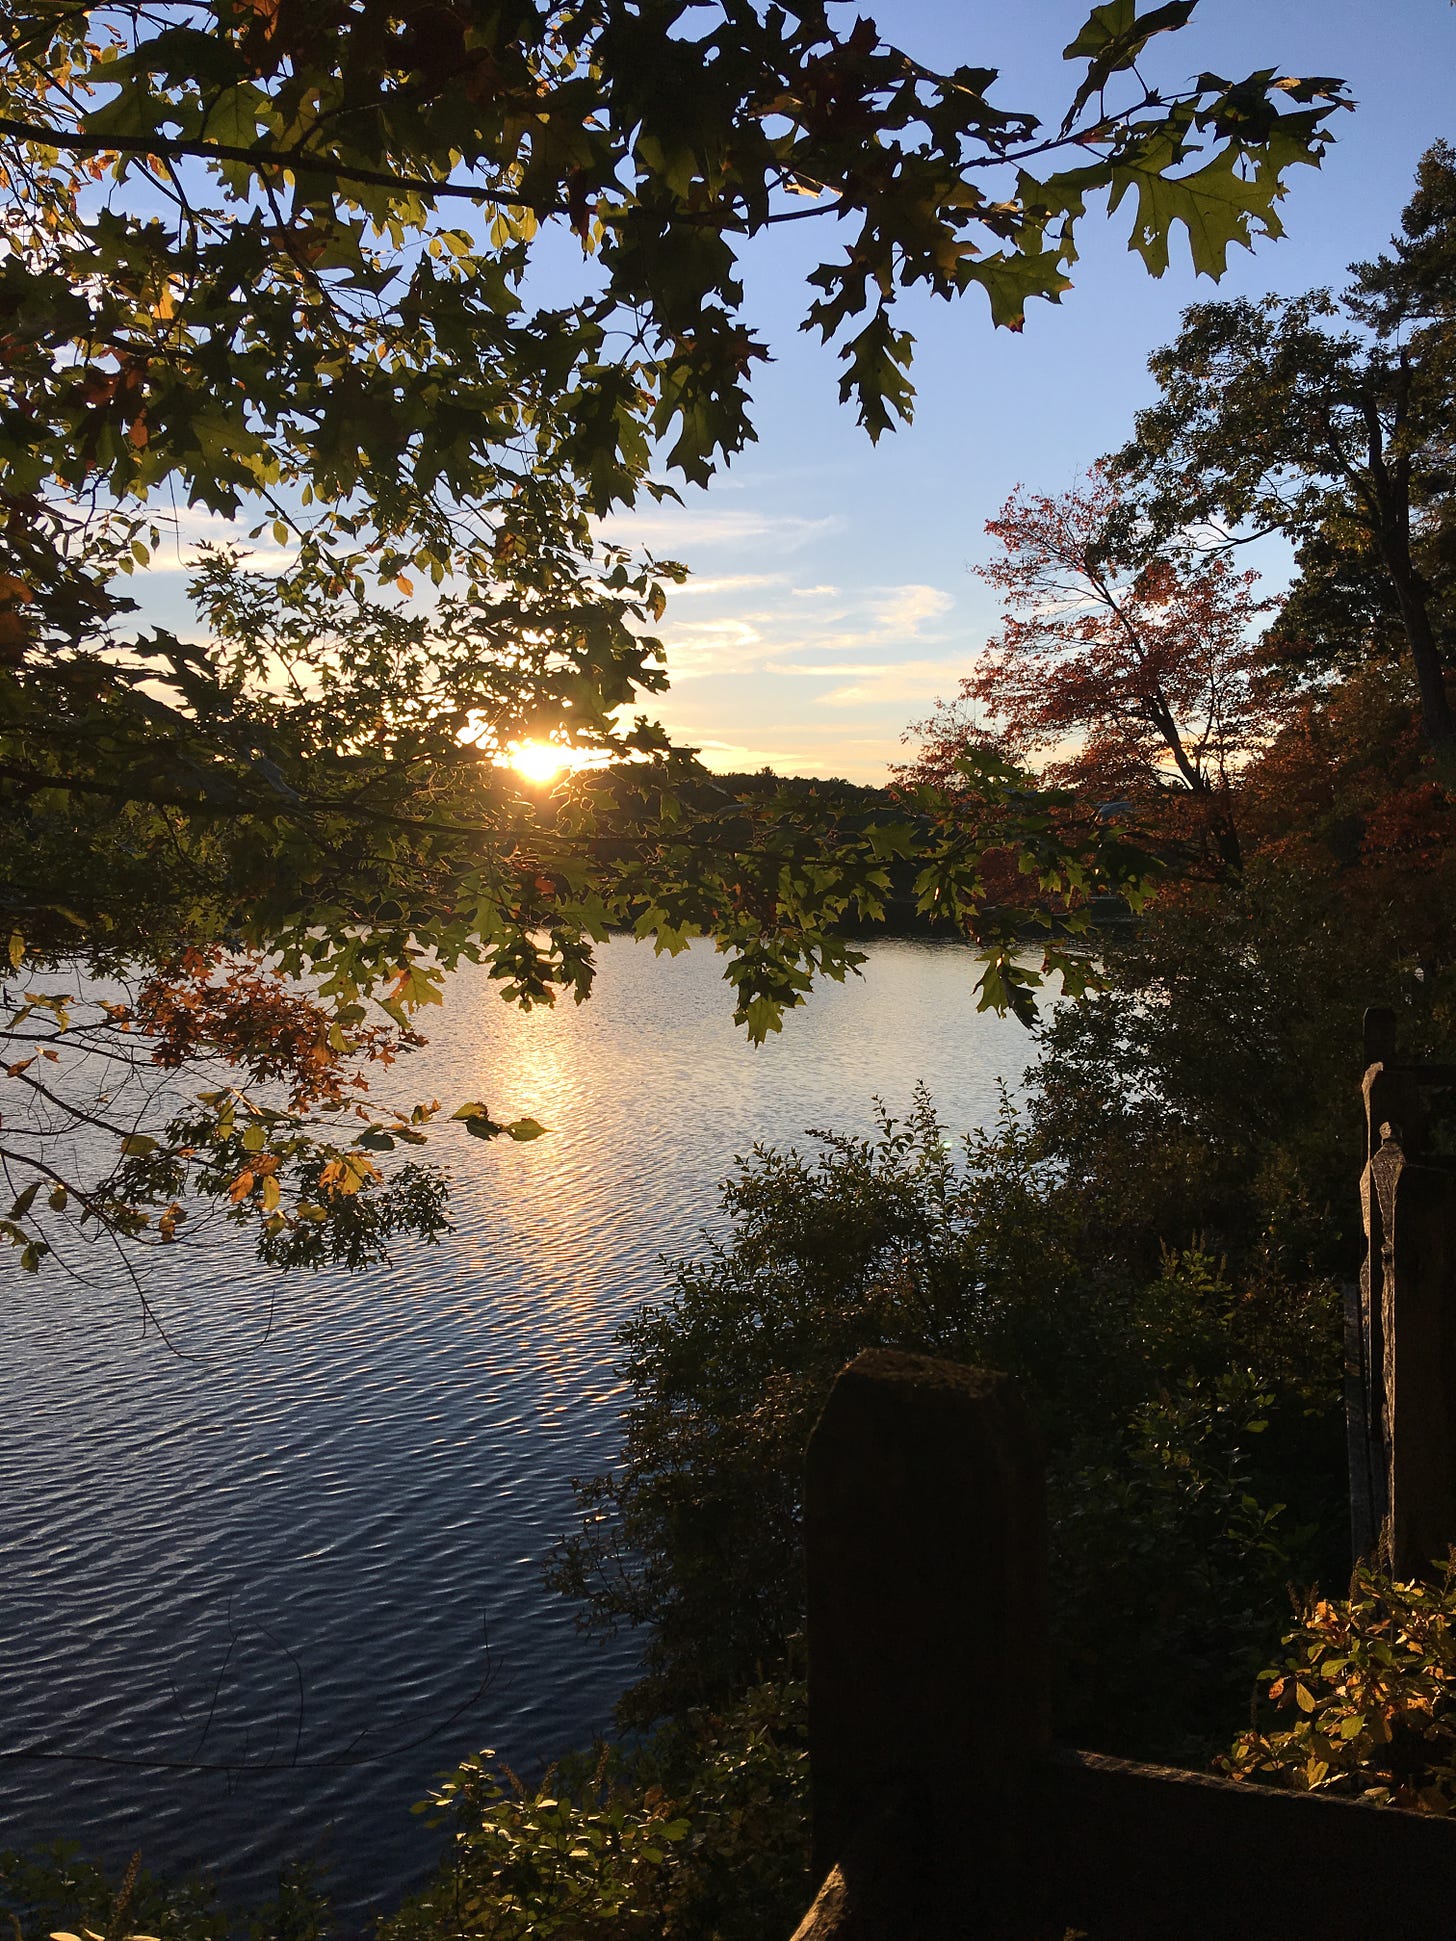 The sun setting above a lake, seen through green and red tree leaves